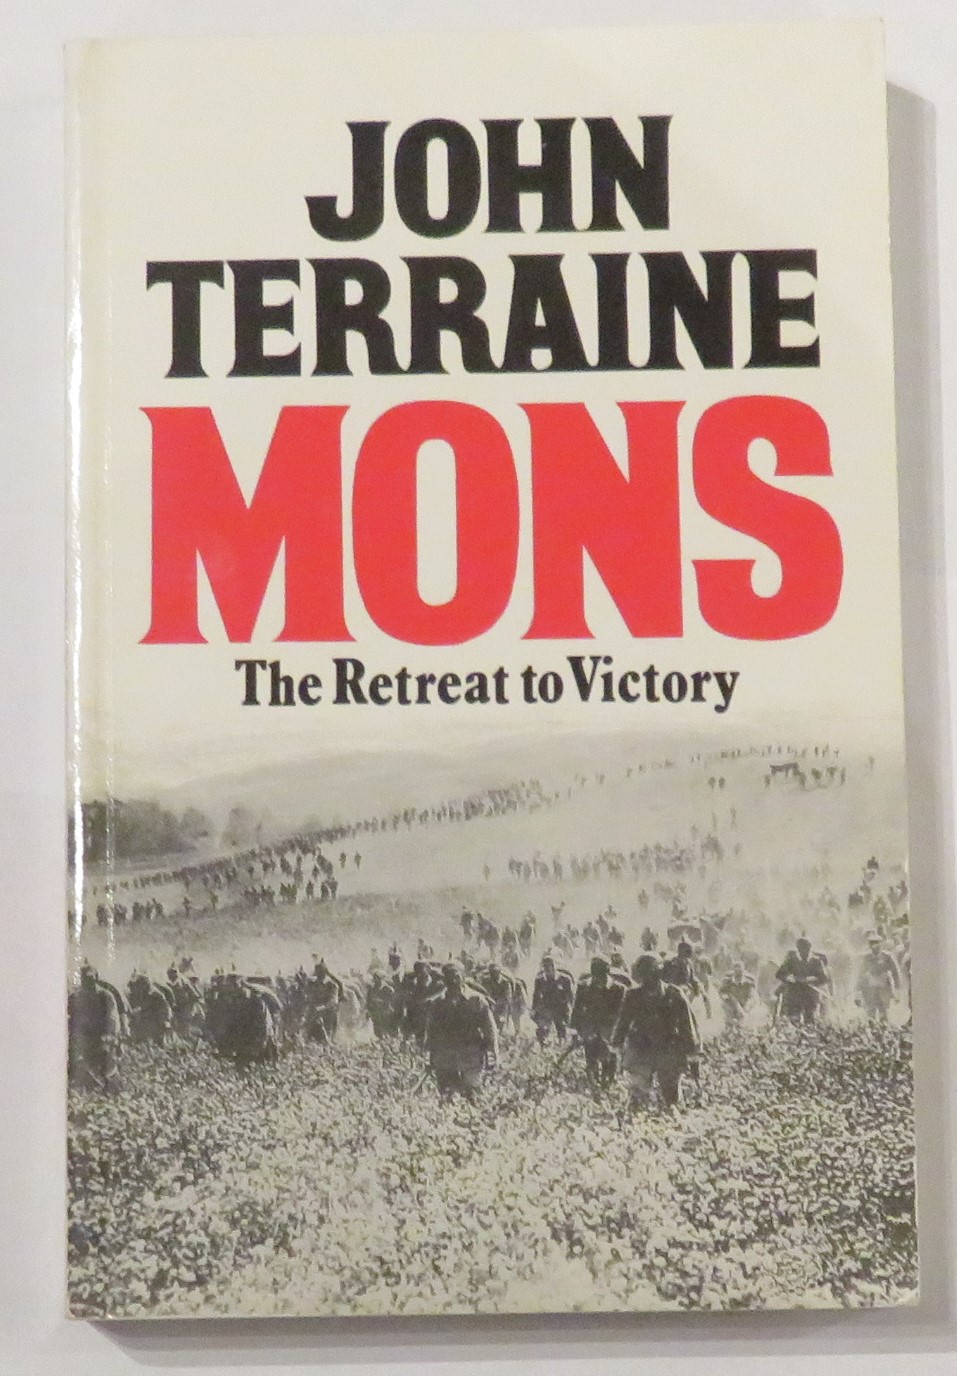 Mons: The Retreat to Victory